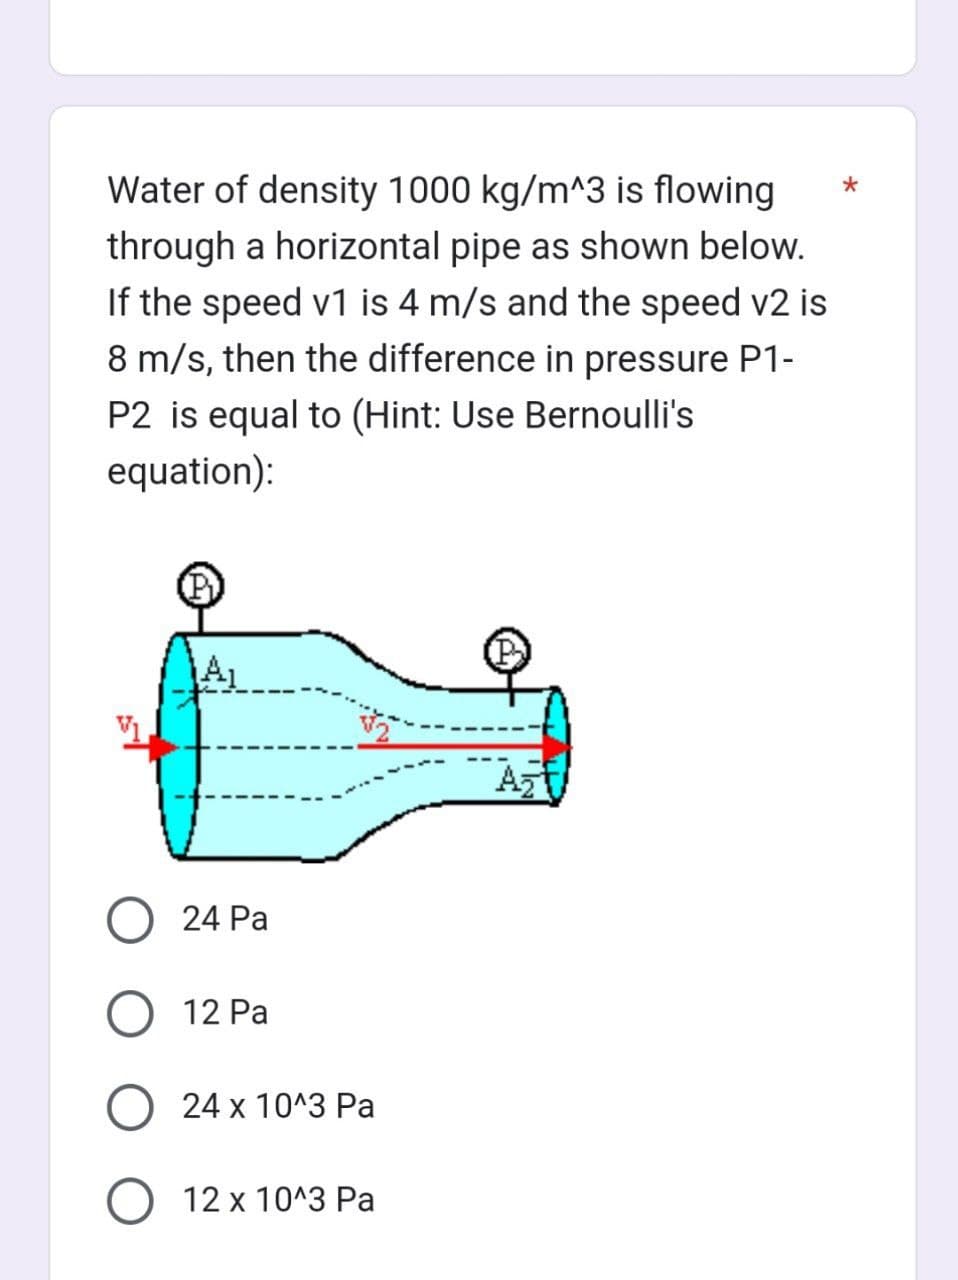 Water of density 1000 kg/m^3 is flowing
through a horizontal pipe as shown below.
If the speed v1 is 4 m/s and the speed v2 is
8 m/s, then the difference in pressure P1-
P2 is equal to (Hint: Use Bernoulli's
equation):
24 Pa
12 Pa
O24 x 10^3 Pa
O 12 x 10^3 Pa